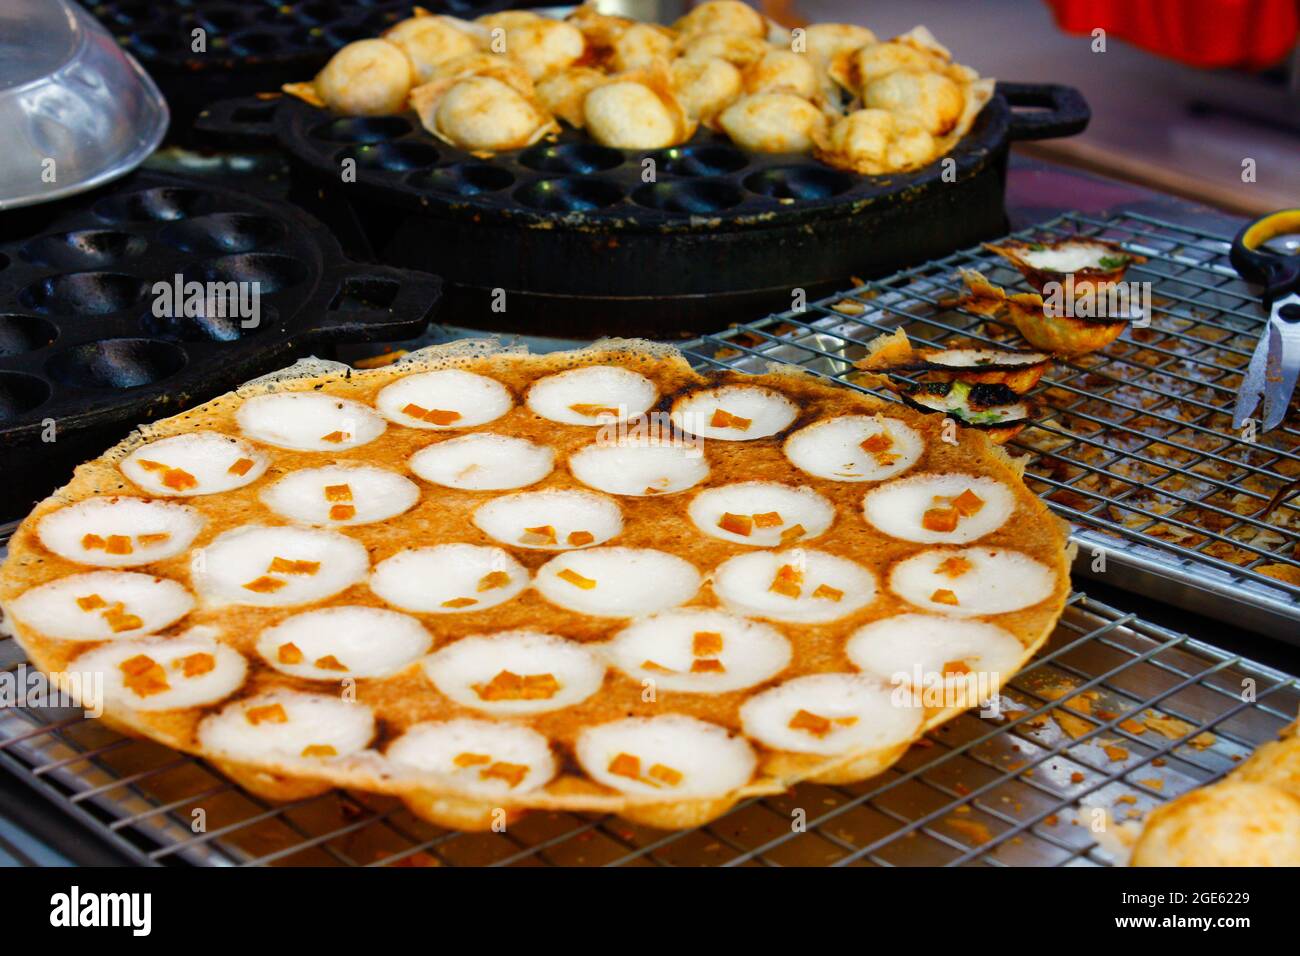 Photo of Thai street food snack call Kanomkrok. It is kind of Rice+Coconut milk pancake in round shape. Stock Photo